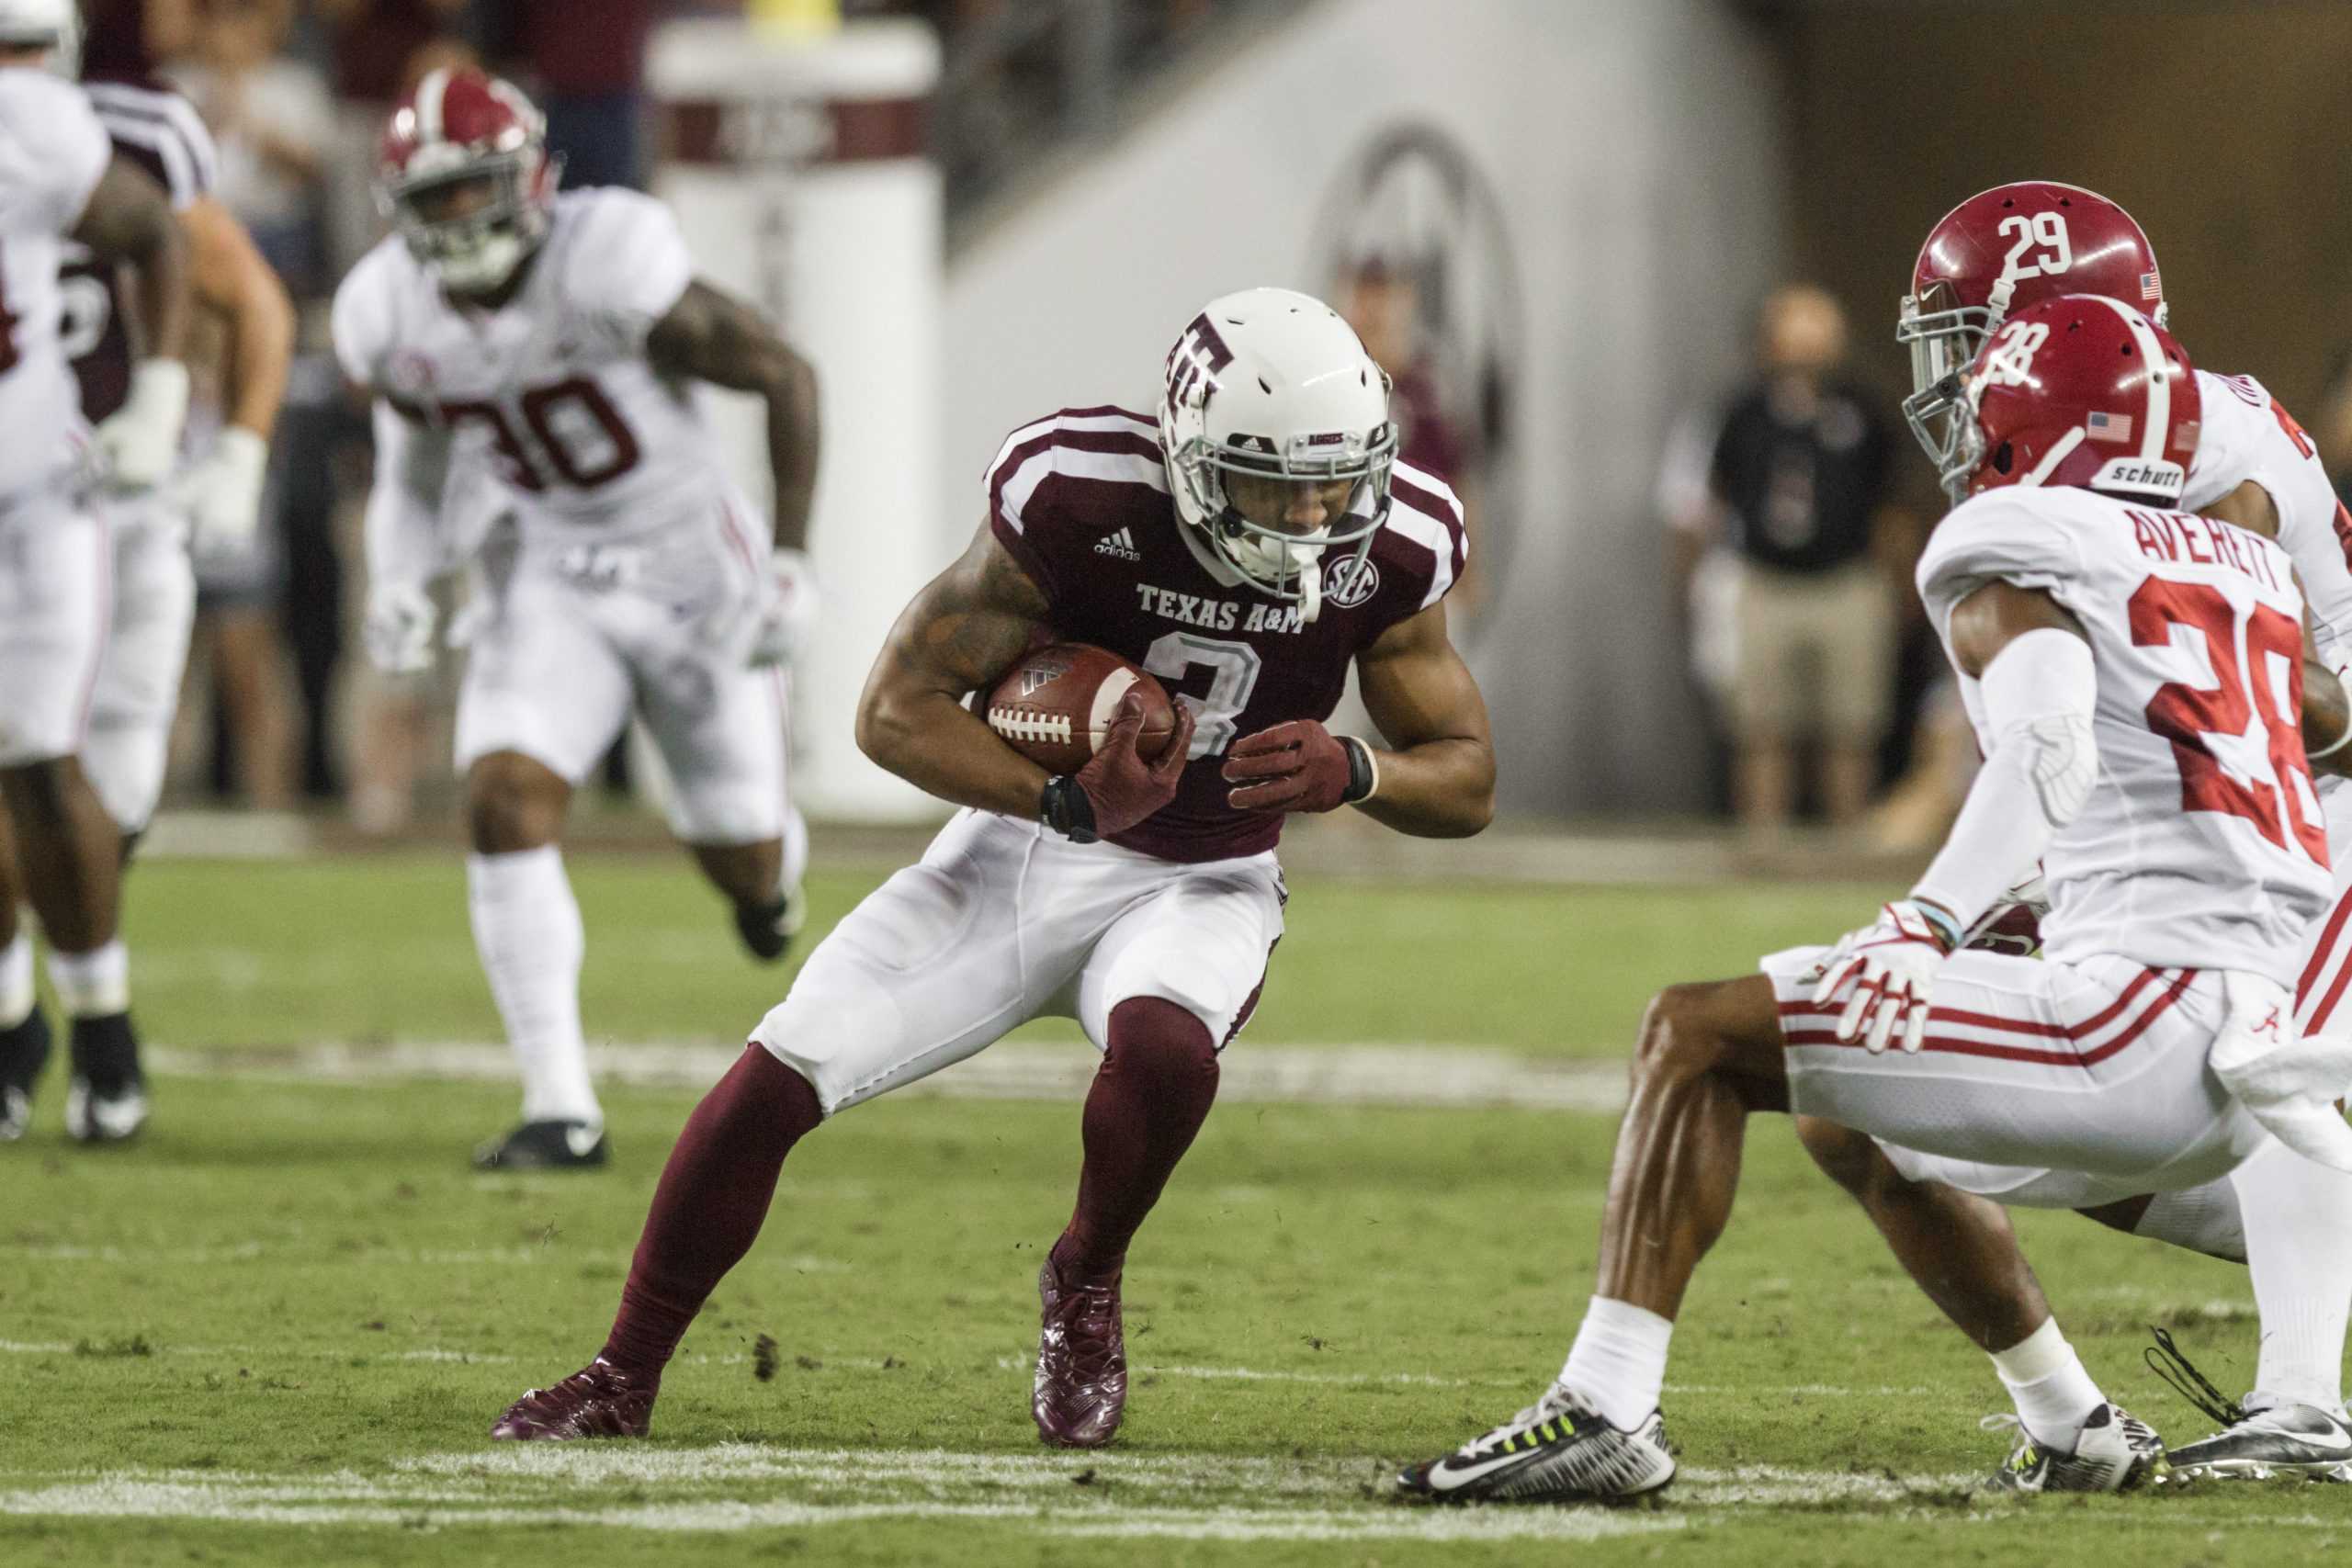 Grading+the+Aggies%3A+from+the+season+opener+to+the+off+week